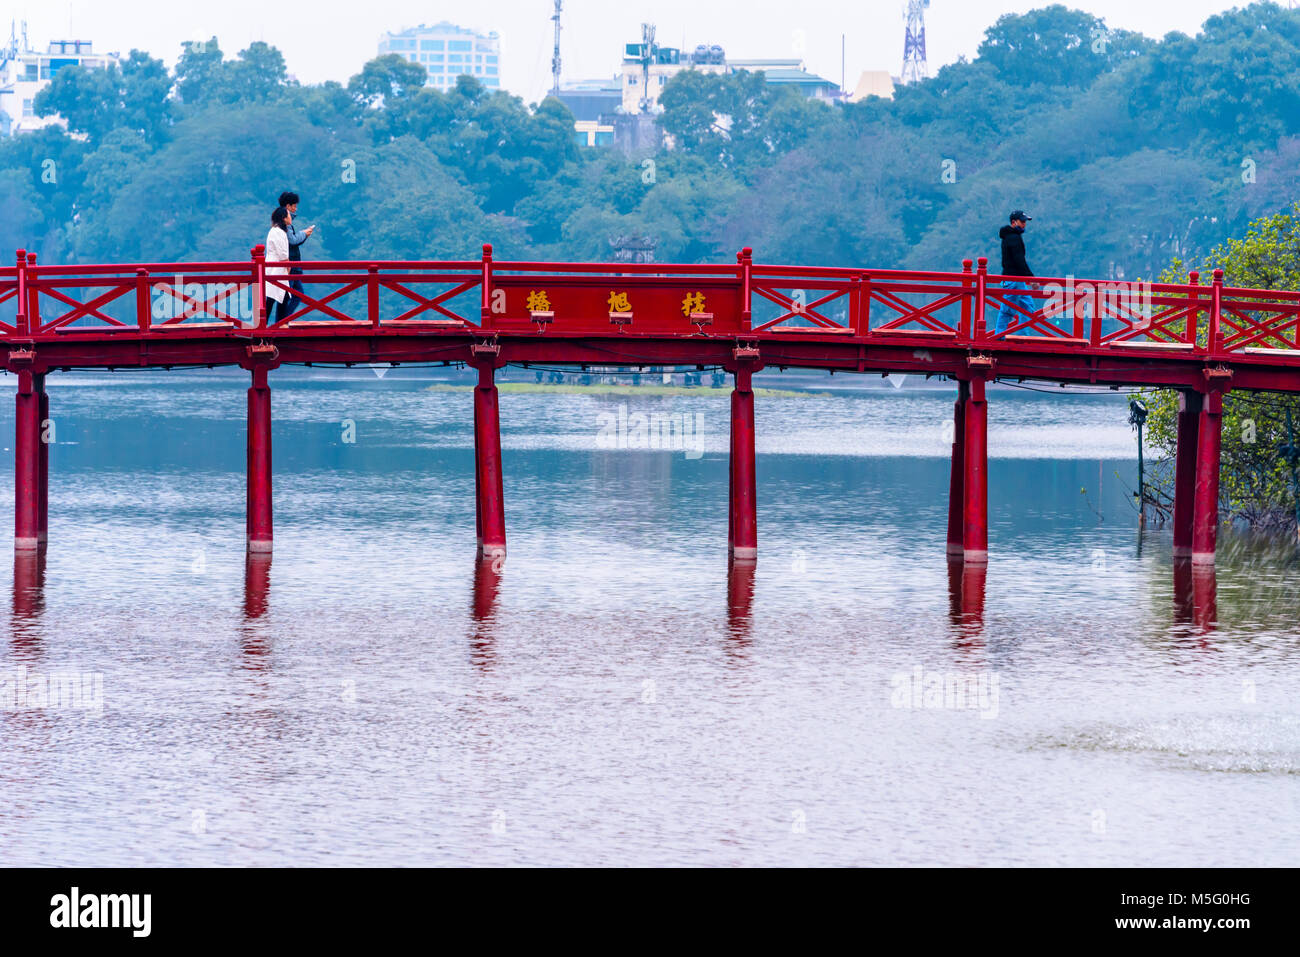 A young couple walk arcoss the iconic red painted Huc Bridge over Ho Hoan Kiem Lake, Hanoi, Vietnam which leads to the Den Ngoc Son Confucious Temple. Stock Photo